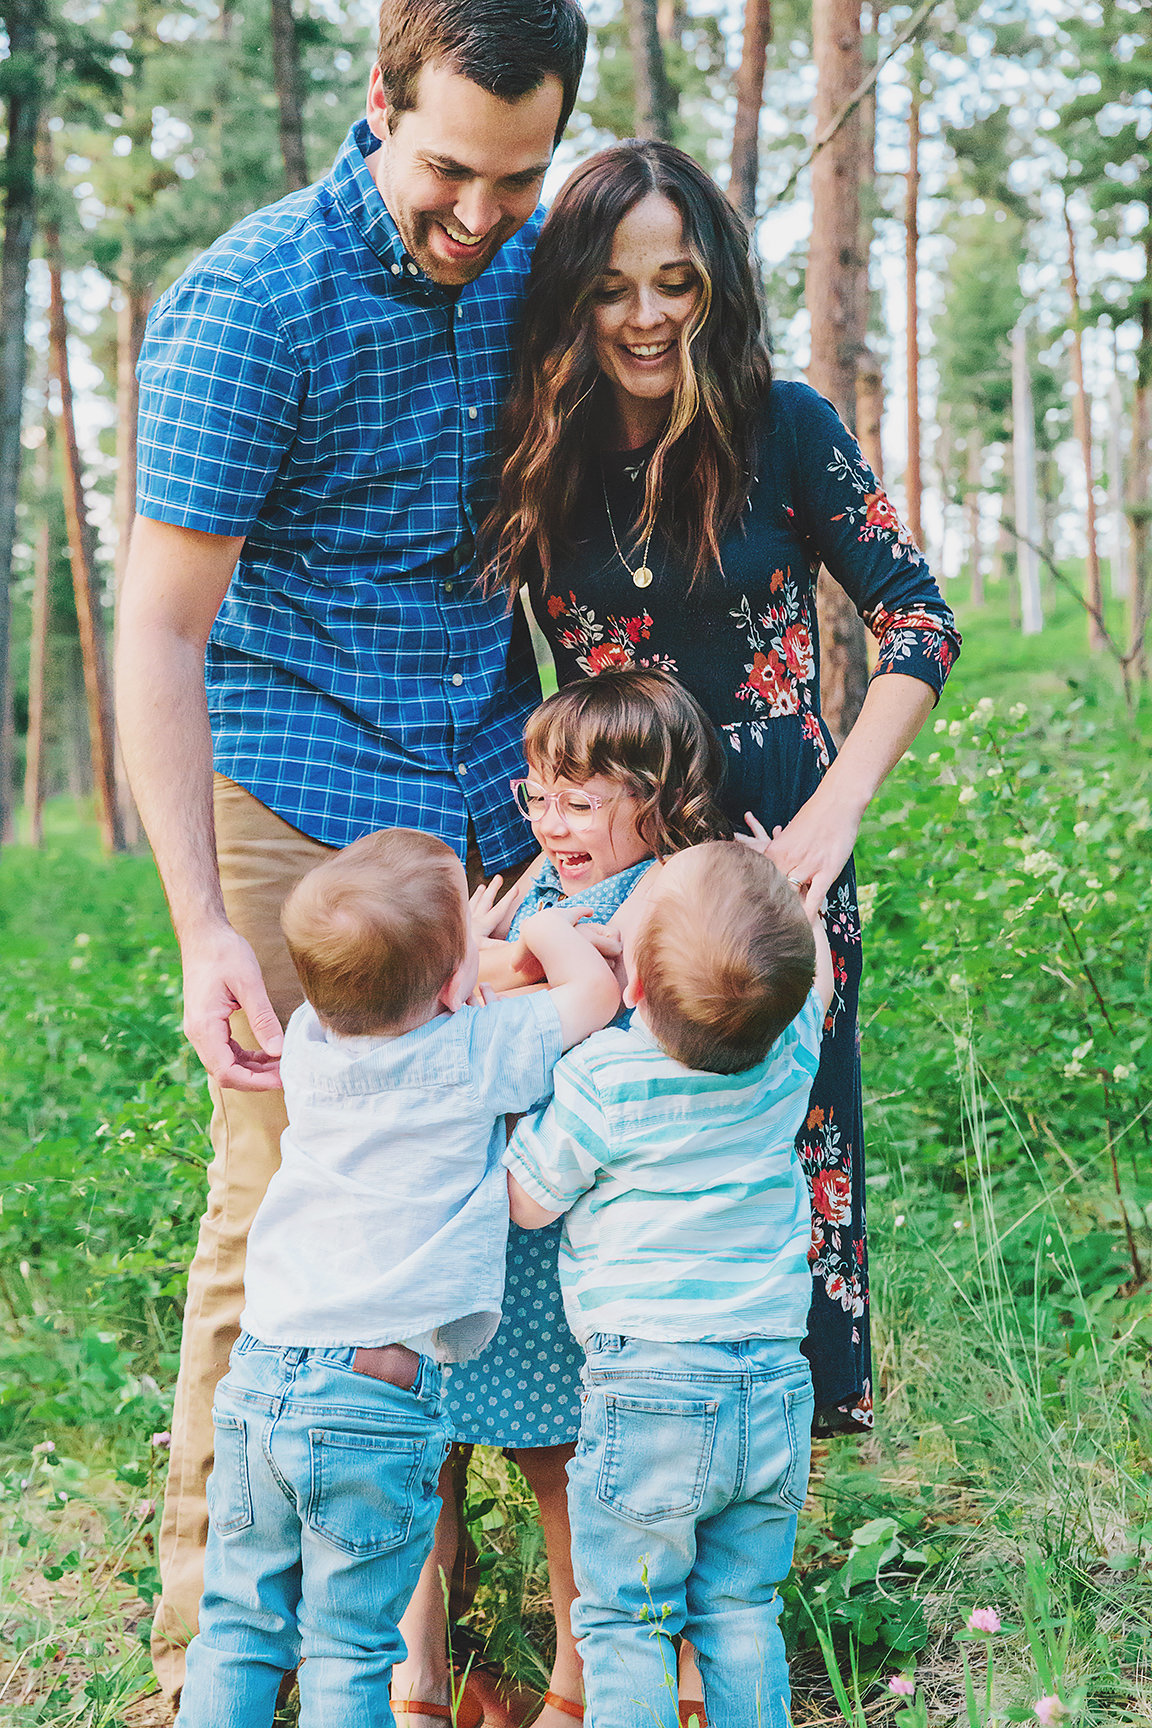 Wendy Parrish Photography is a Missoula family photographer specializing in newborn, maternity, family and seniors serving Missoula, Great Falls, The Bitterroot Valley and the surrounding areas.